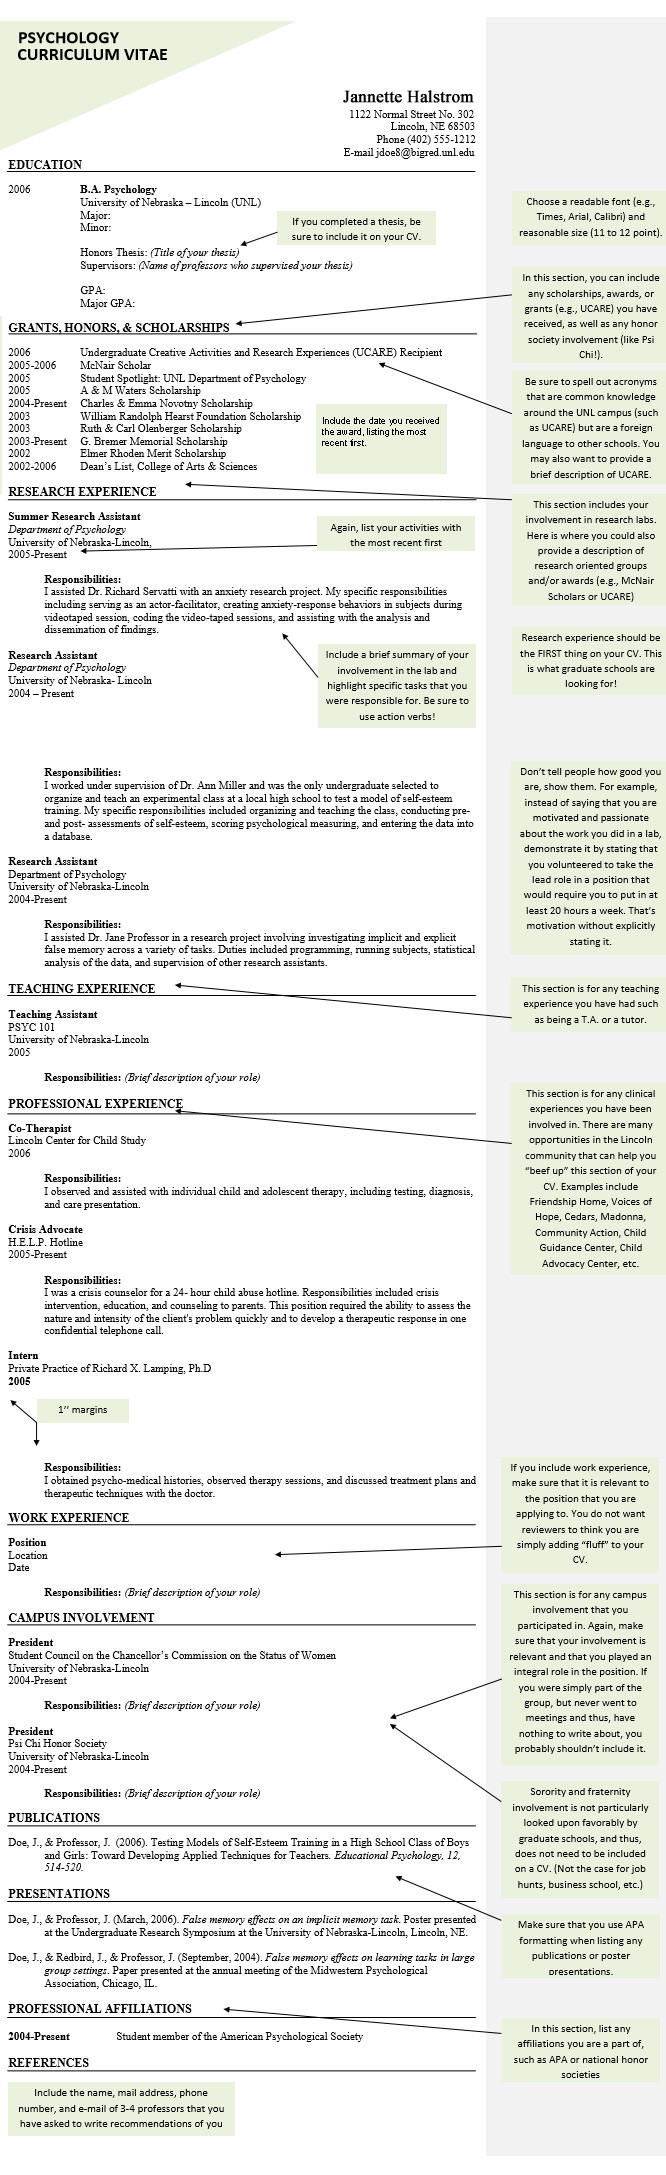 Sample Resume for Psychology Fresh Graduate Psychology Cv and Resume Samples, Templates and Tips